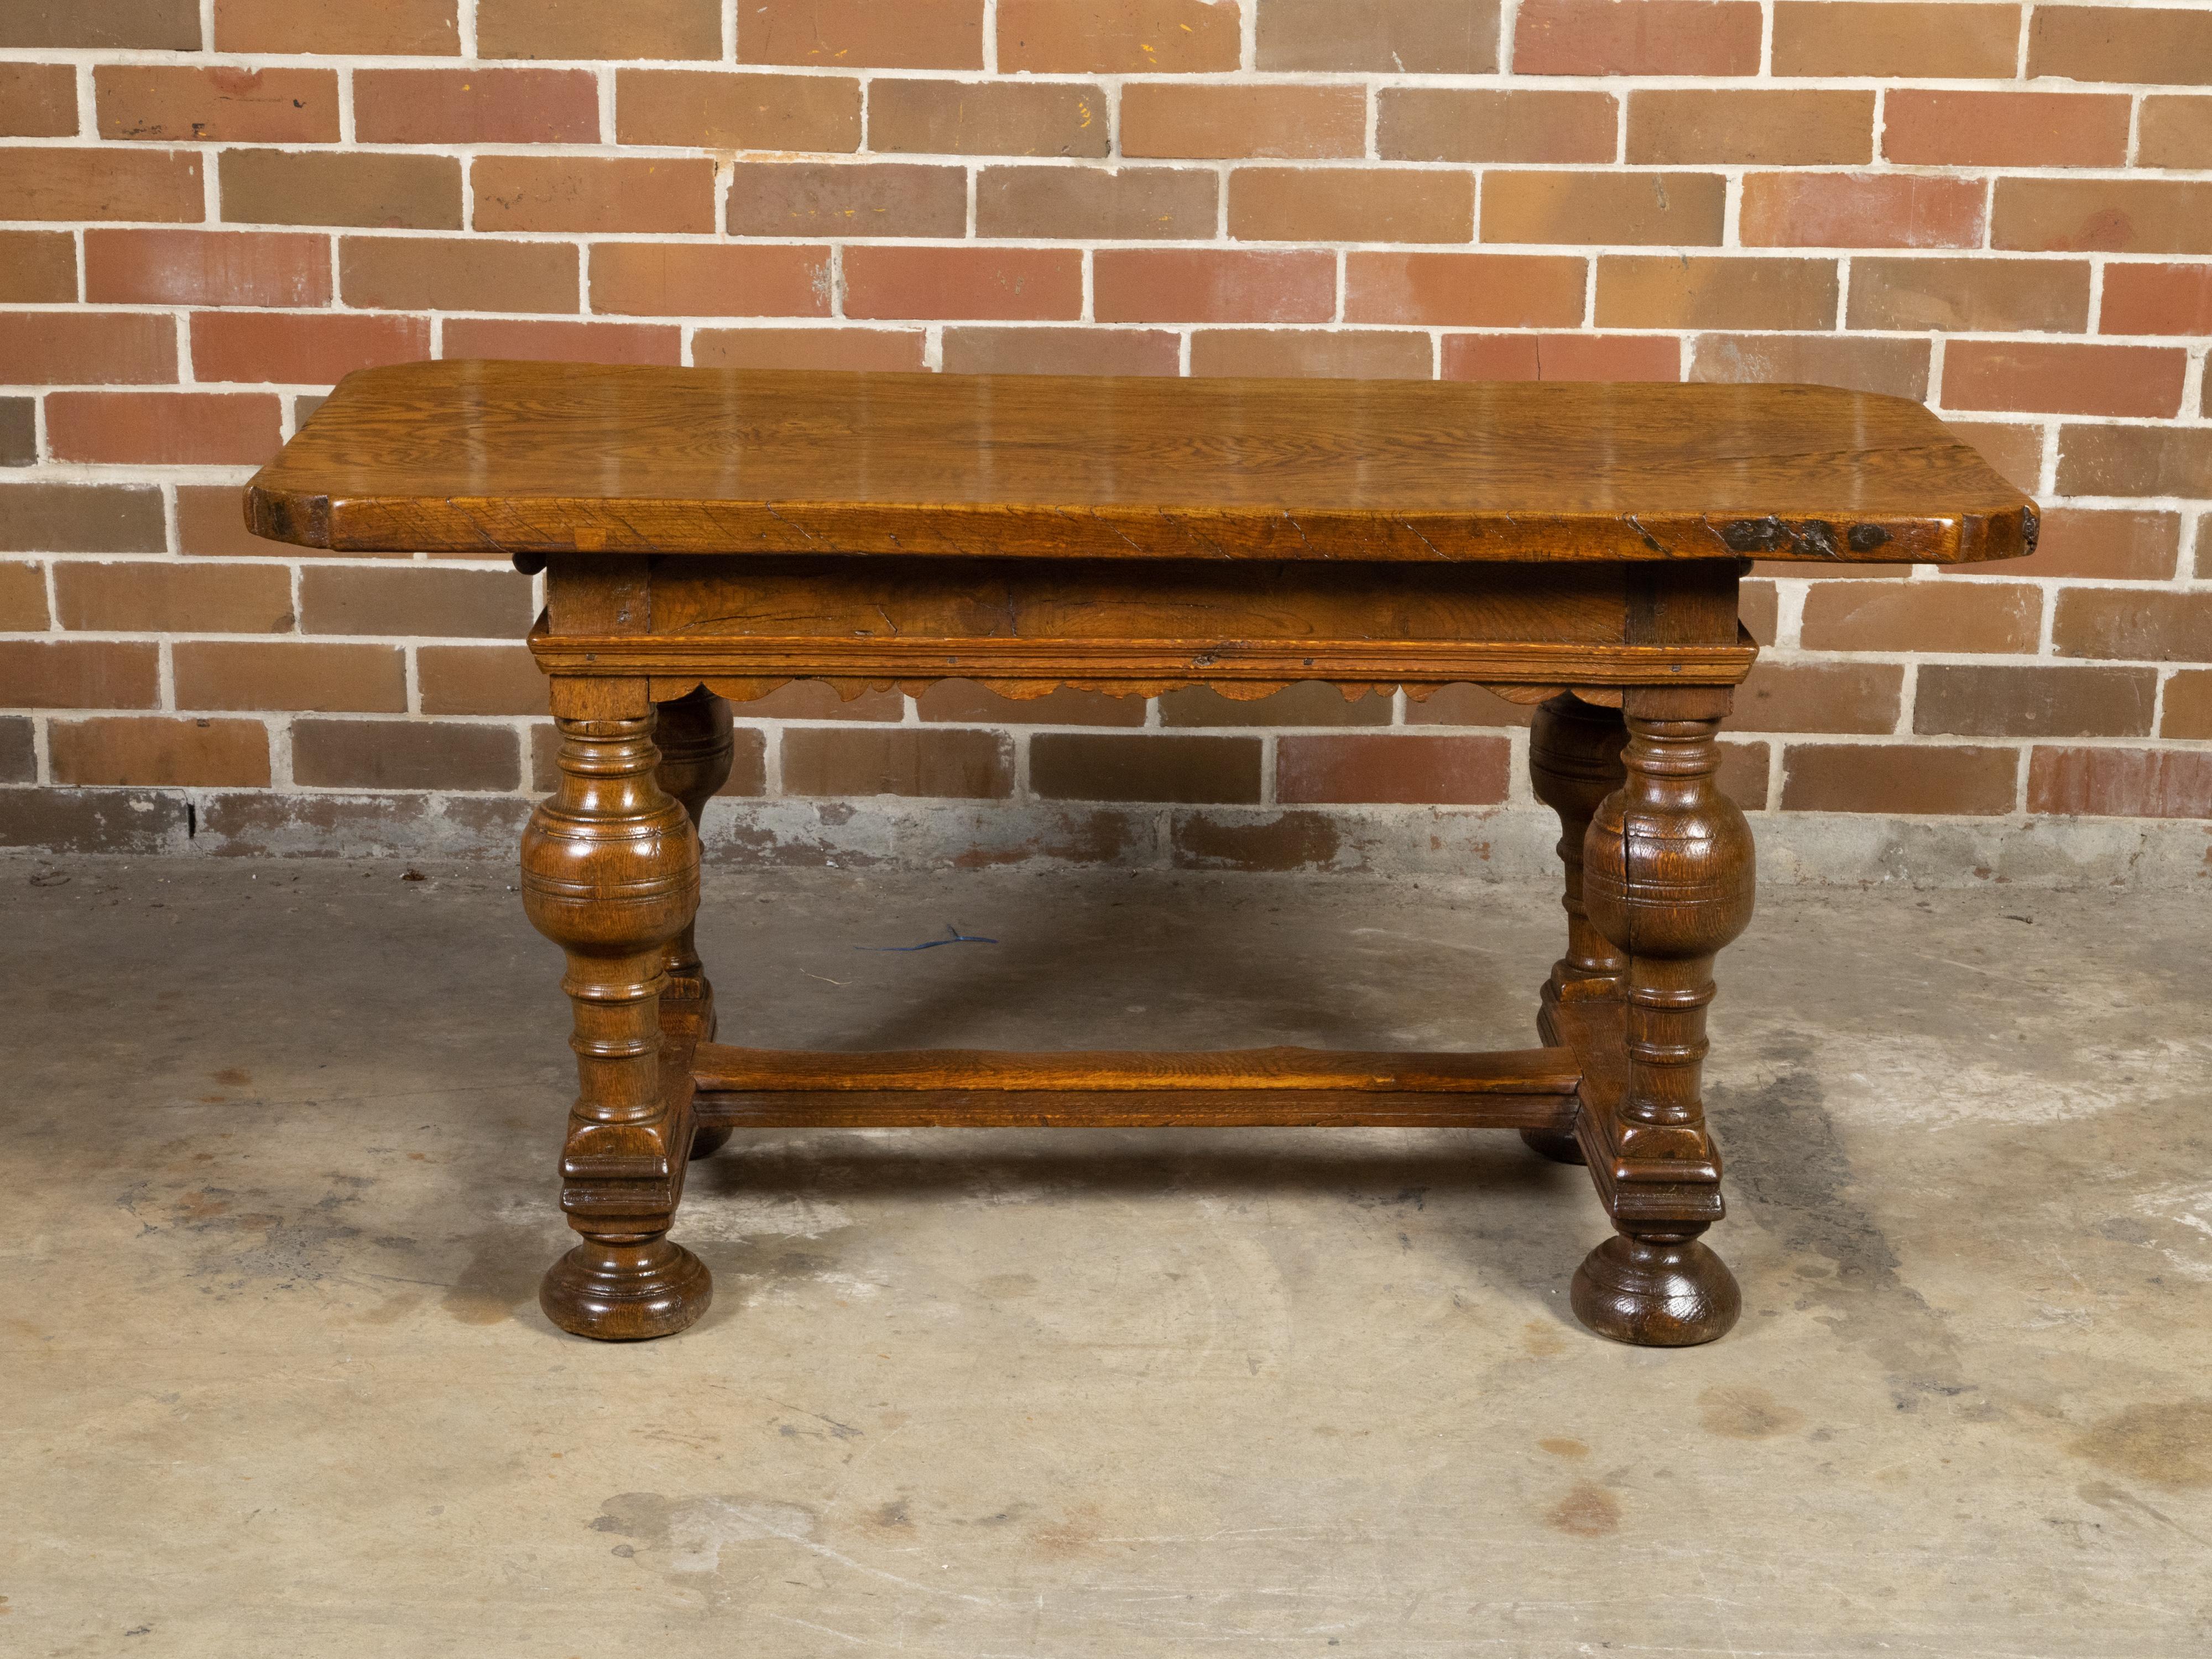 Danish Langeland Late 19th Century Oak Table with Carved Apron and Turned Legs For Sale 2